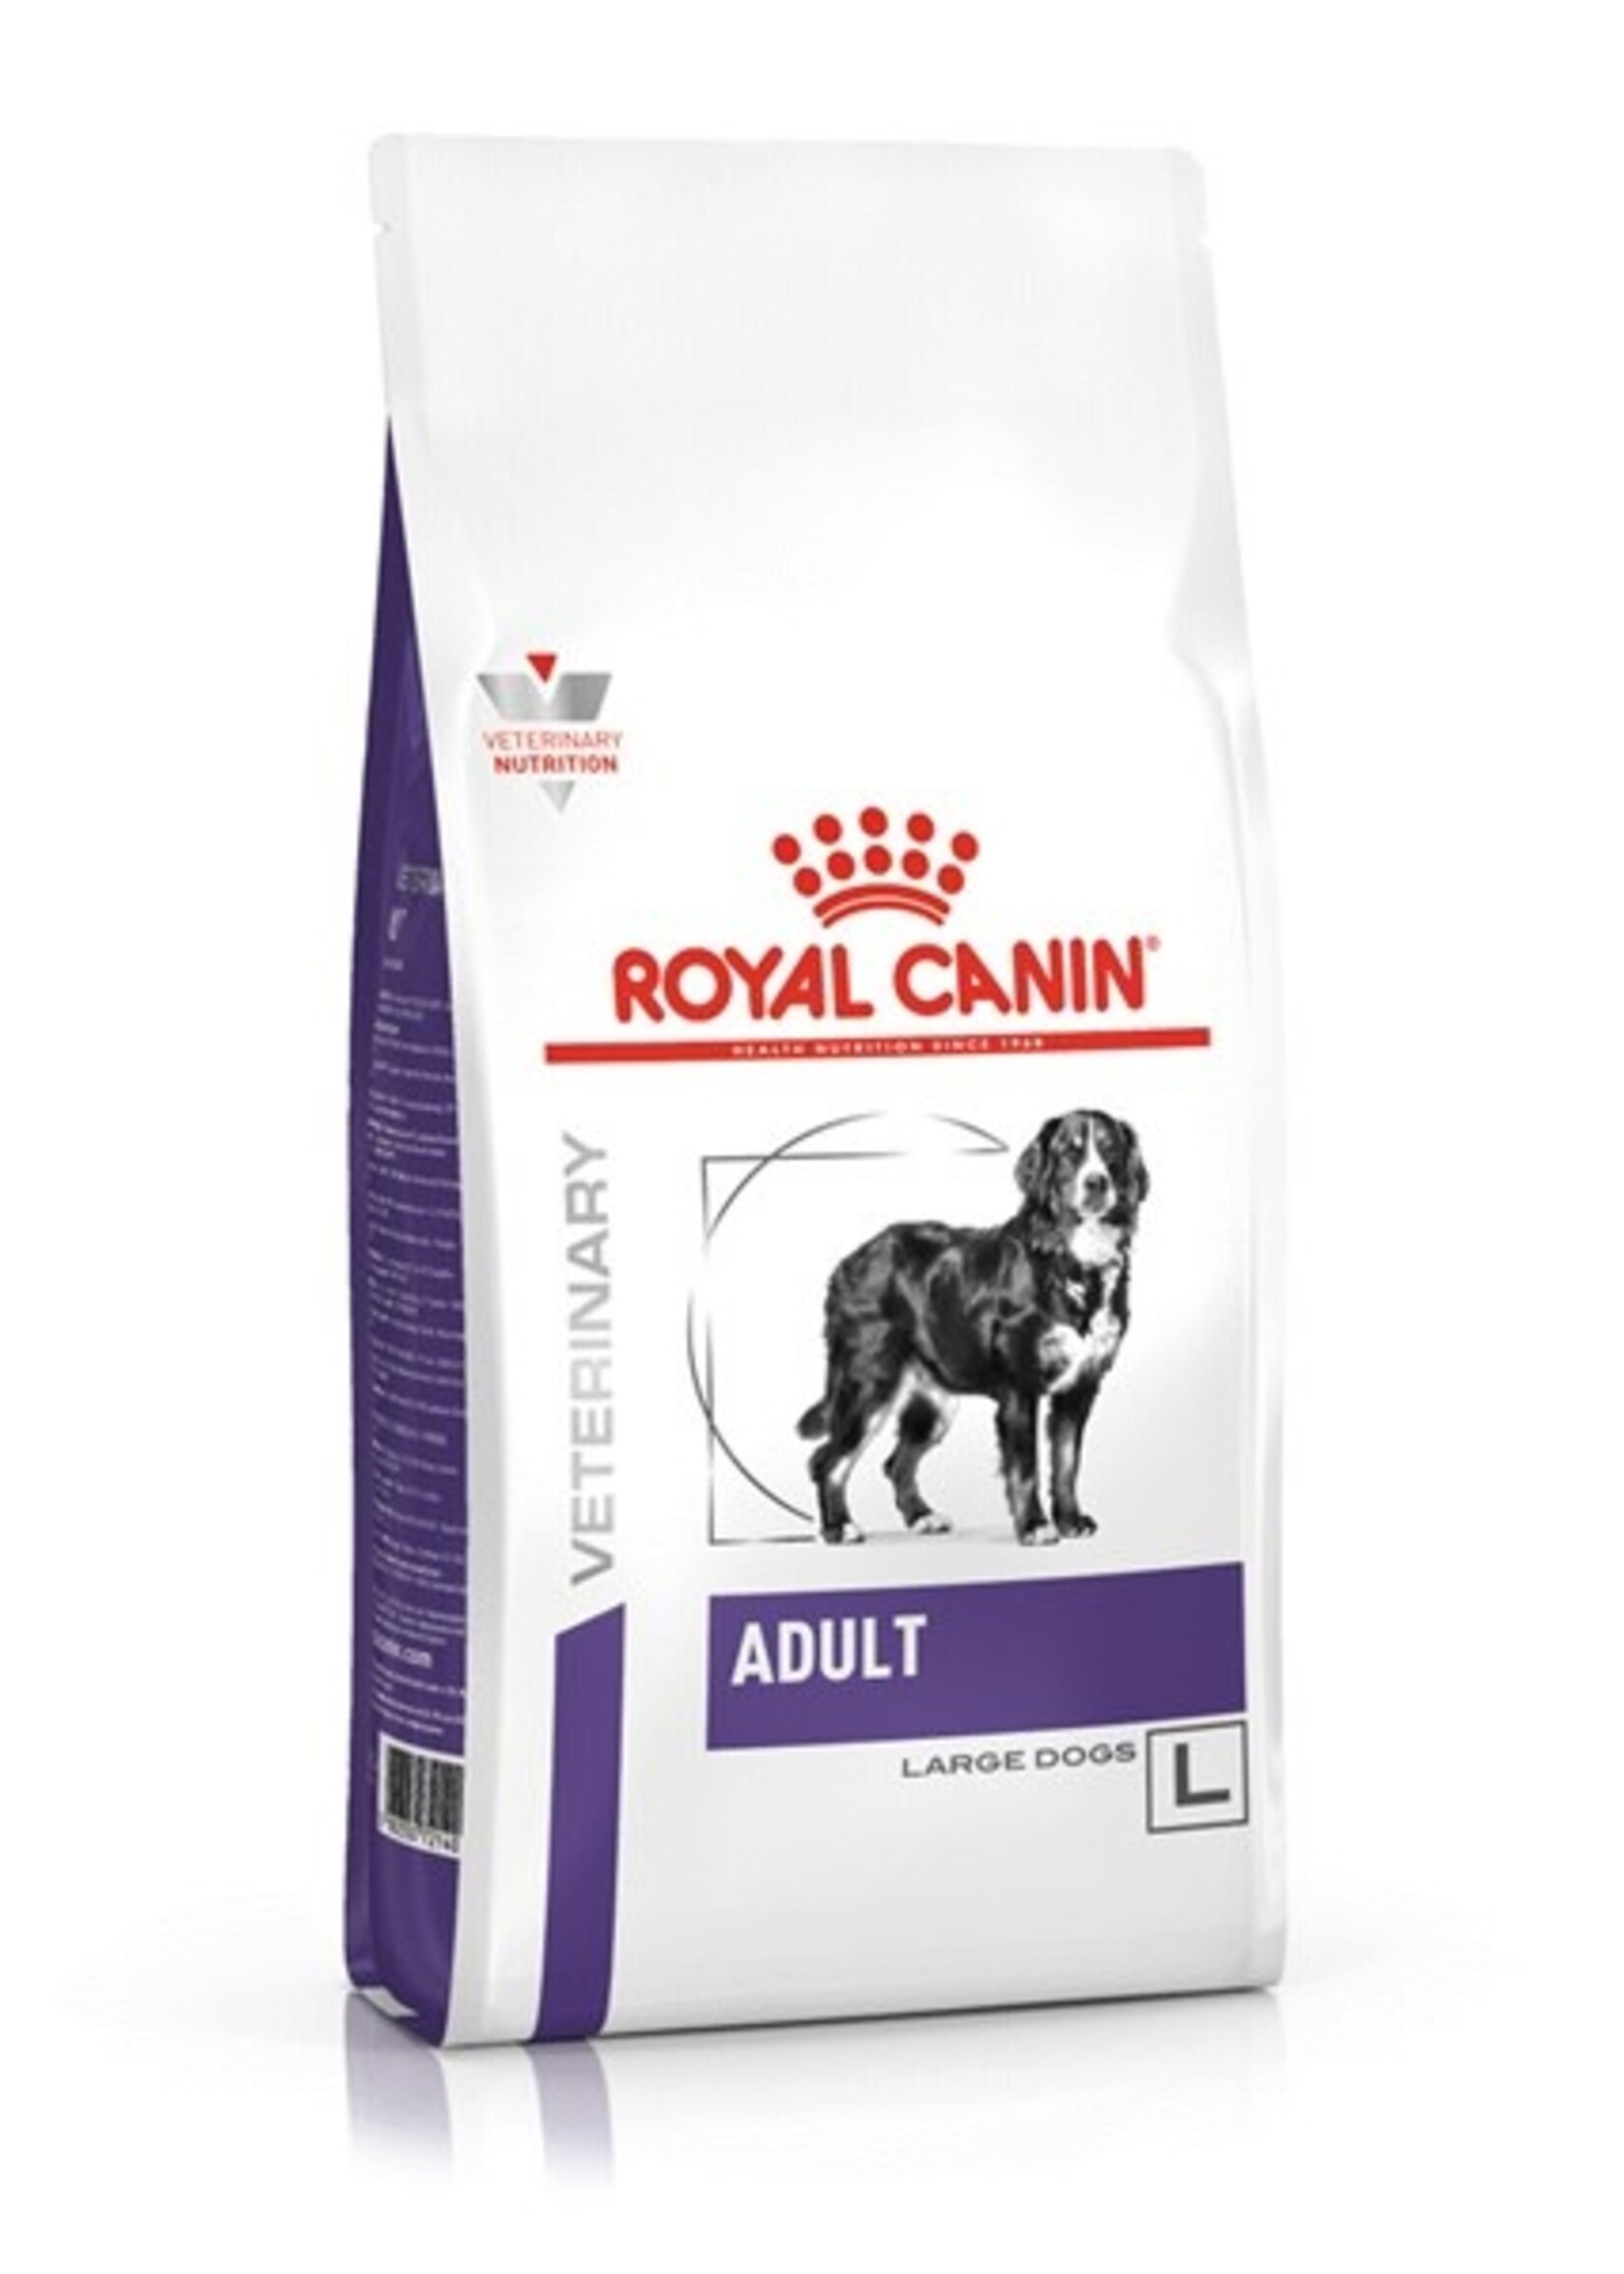 Royal Canin Royal Canin Adult Large Breed Dog (Osteo & Digest) 4kg